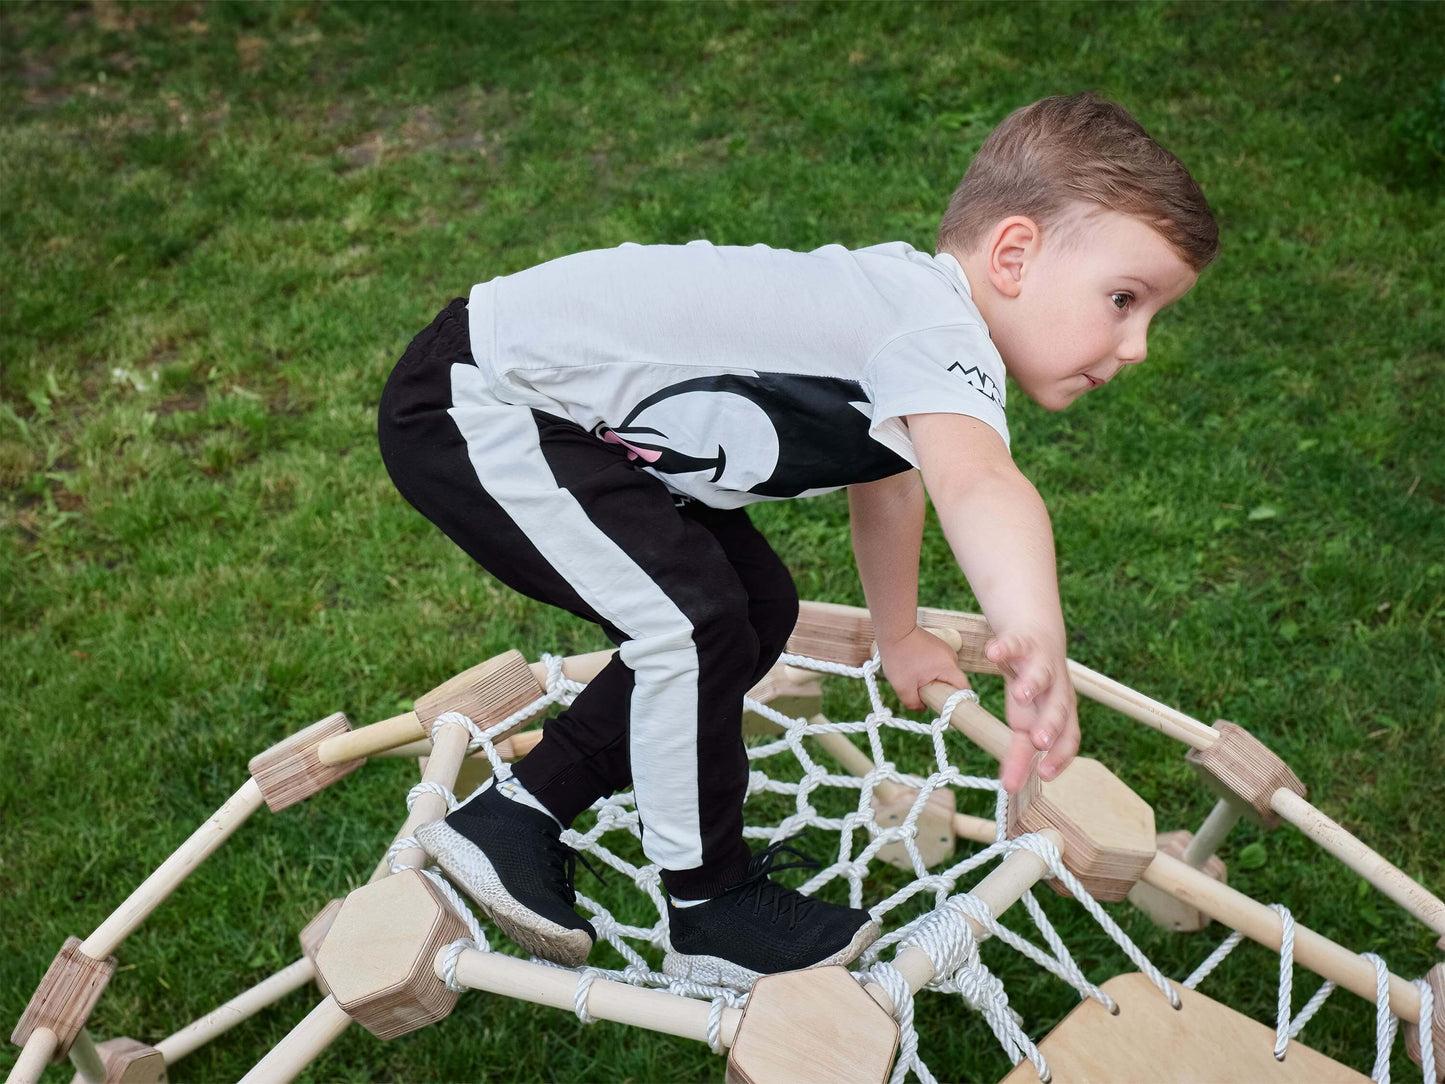 Wooden climbing frame Geodome / climbing dome for children 2-6 years